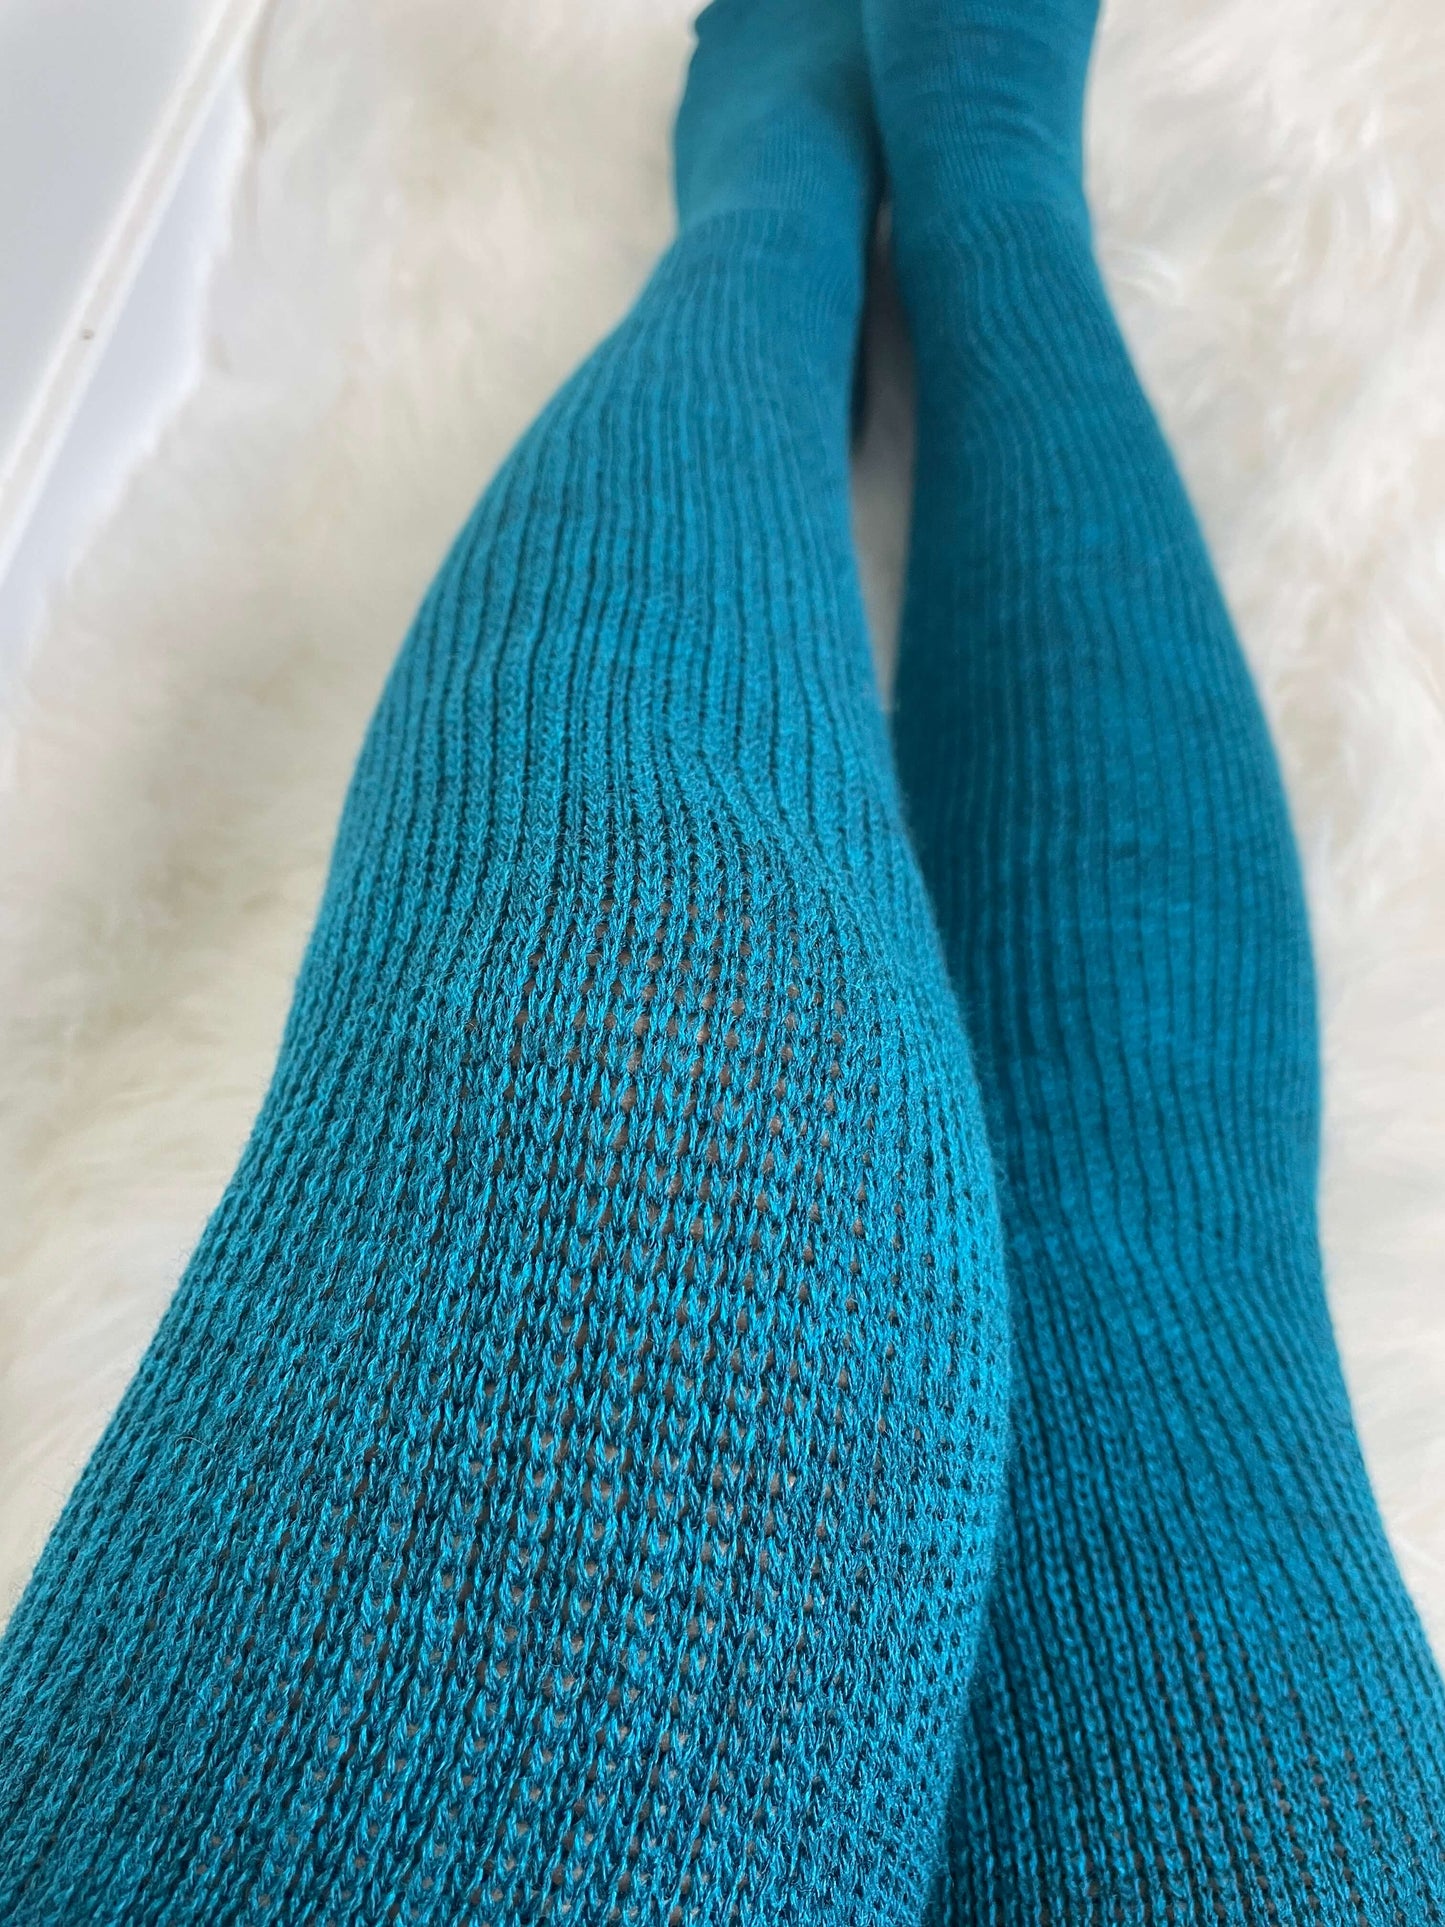 Women's Plus Size Turquoise Over Knee Socks - Sockmate